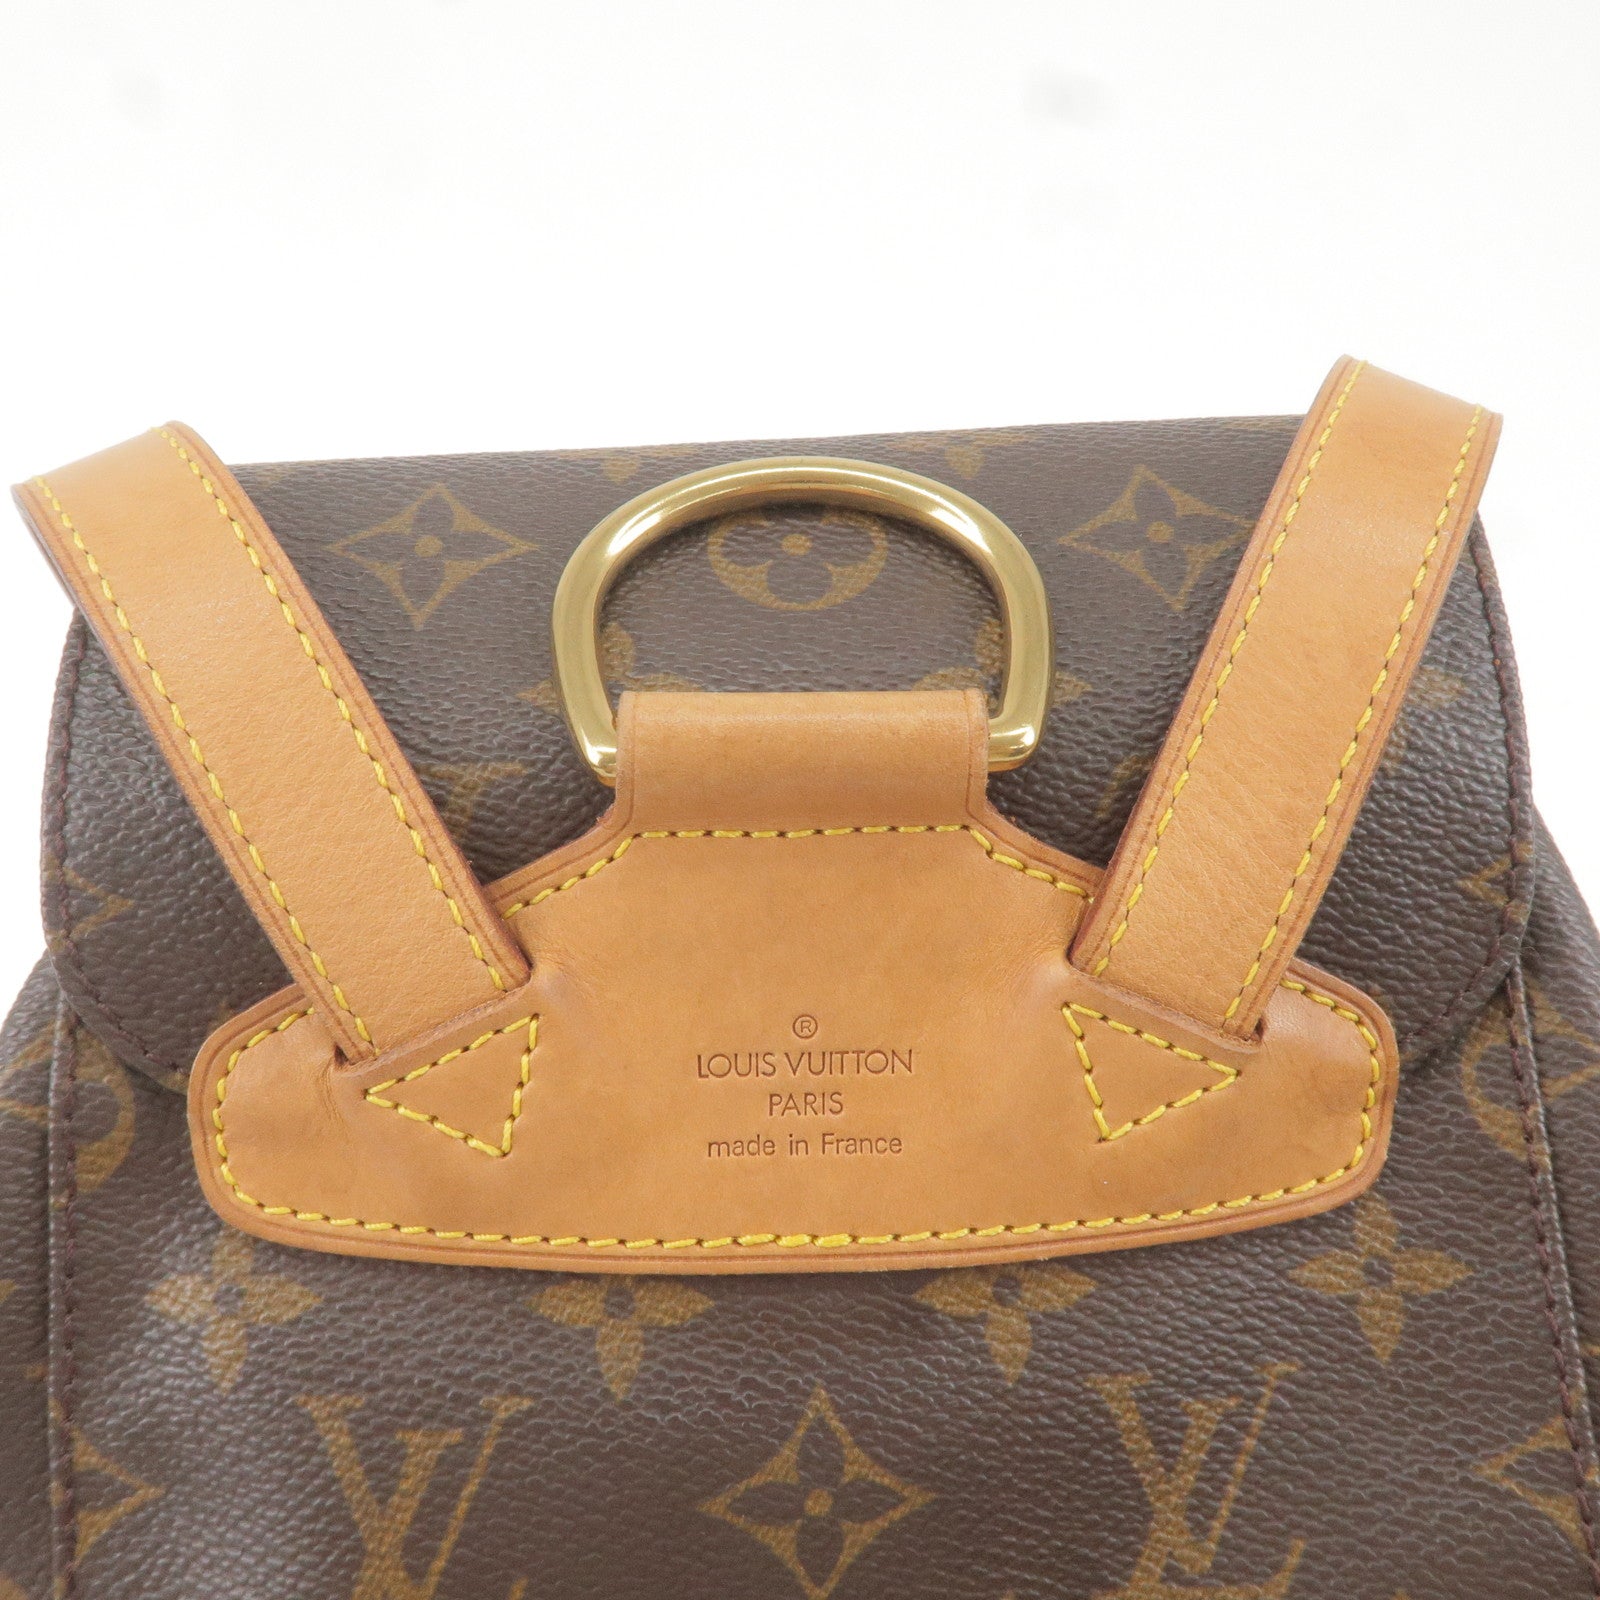 Just got the montsouris backpack in black : r/Louisvuitton